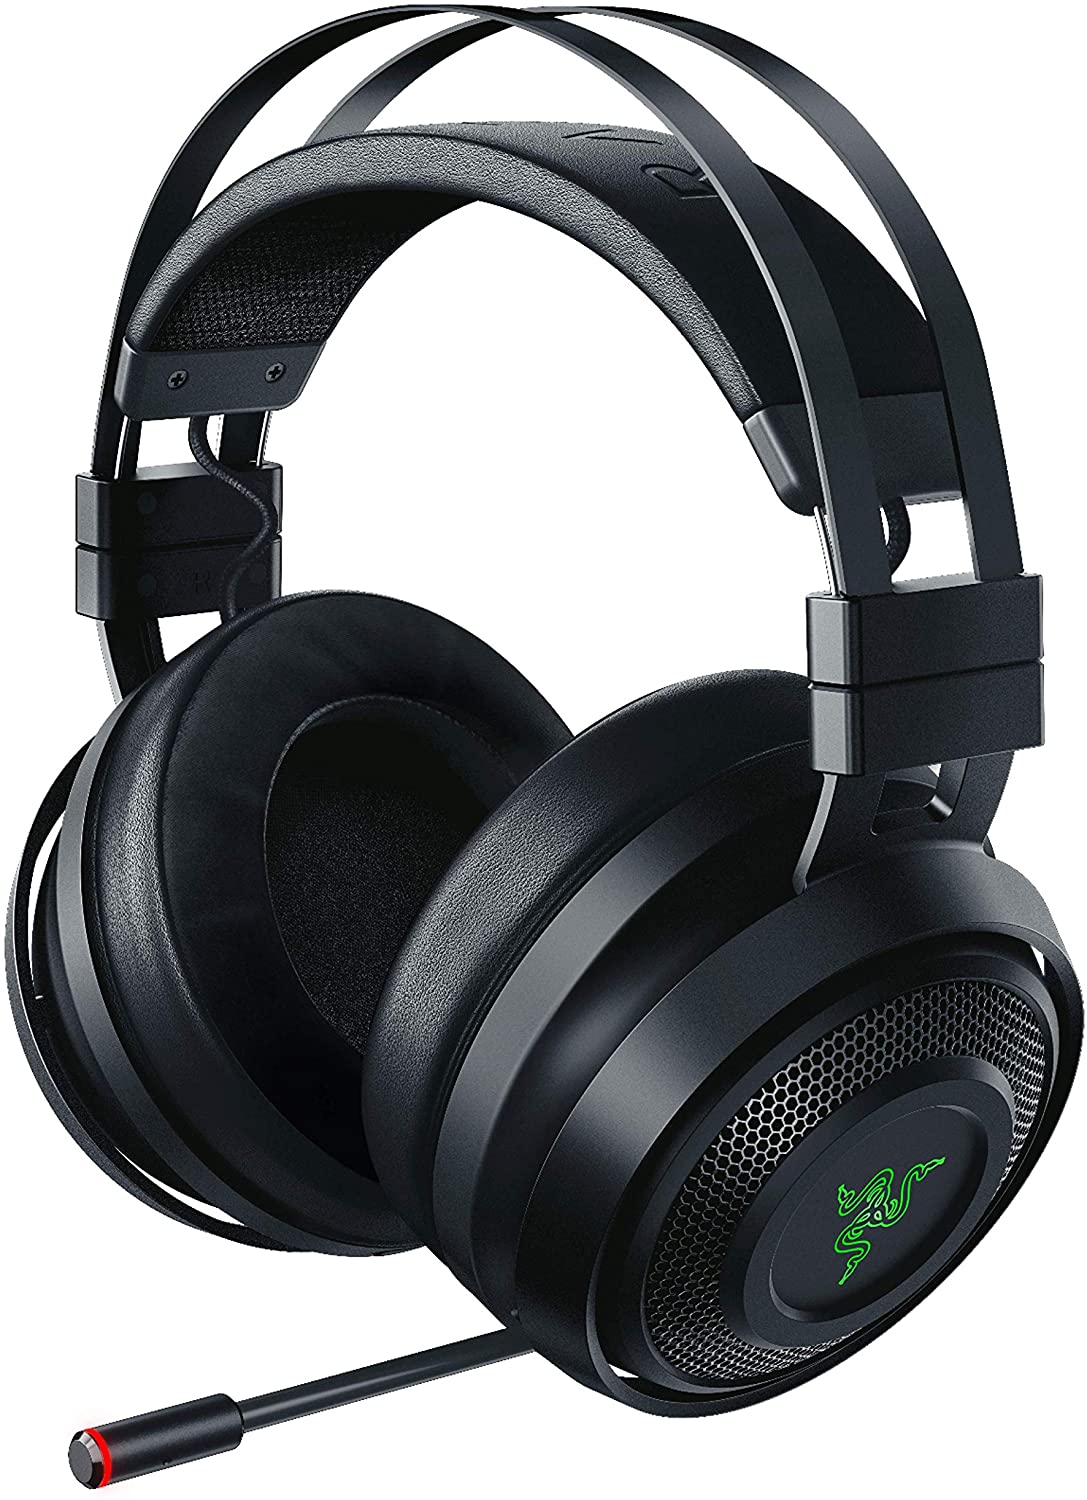 Top 8 Best Razer Wireless Headsets of 2021 - Reviews and Comparison